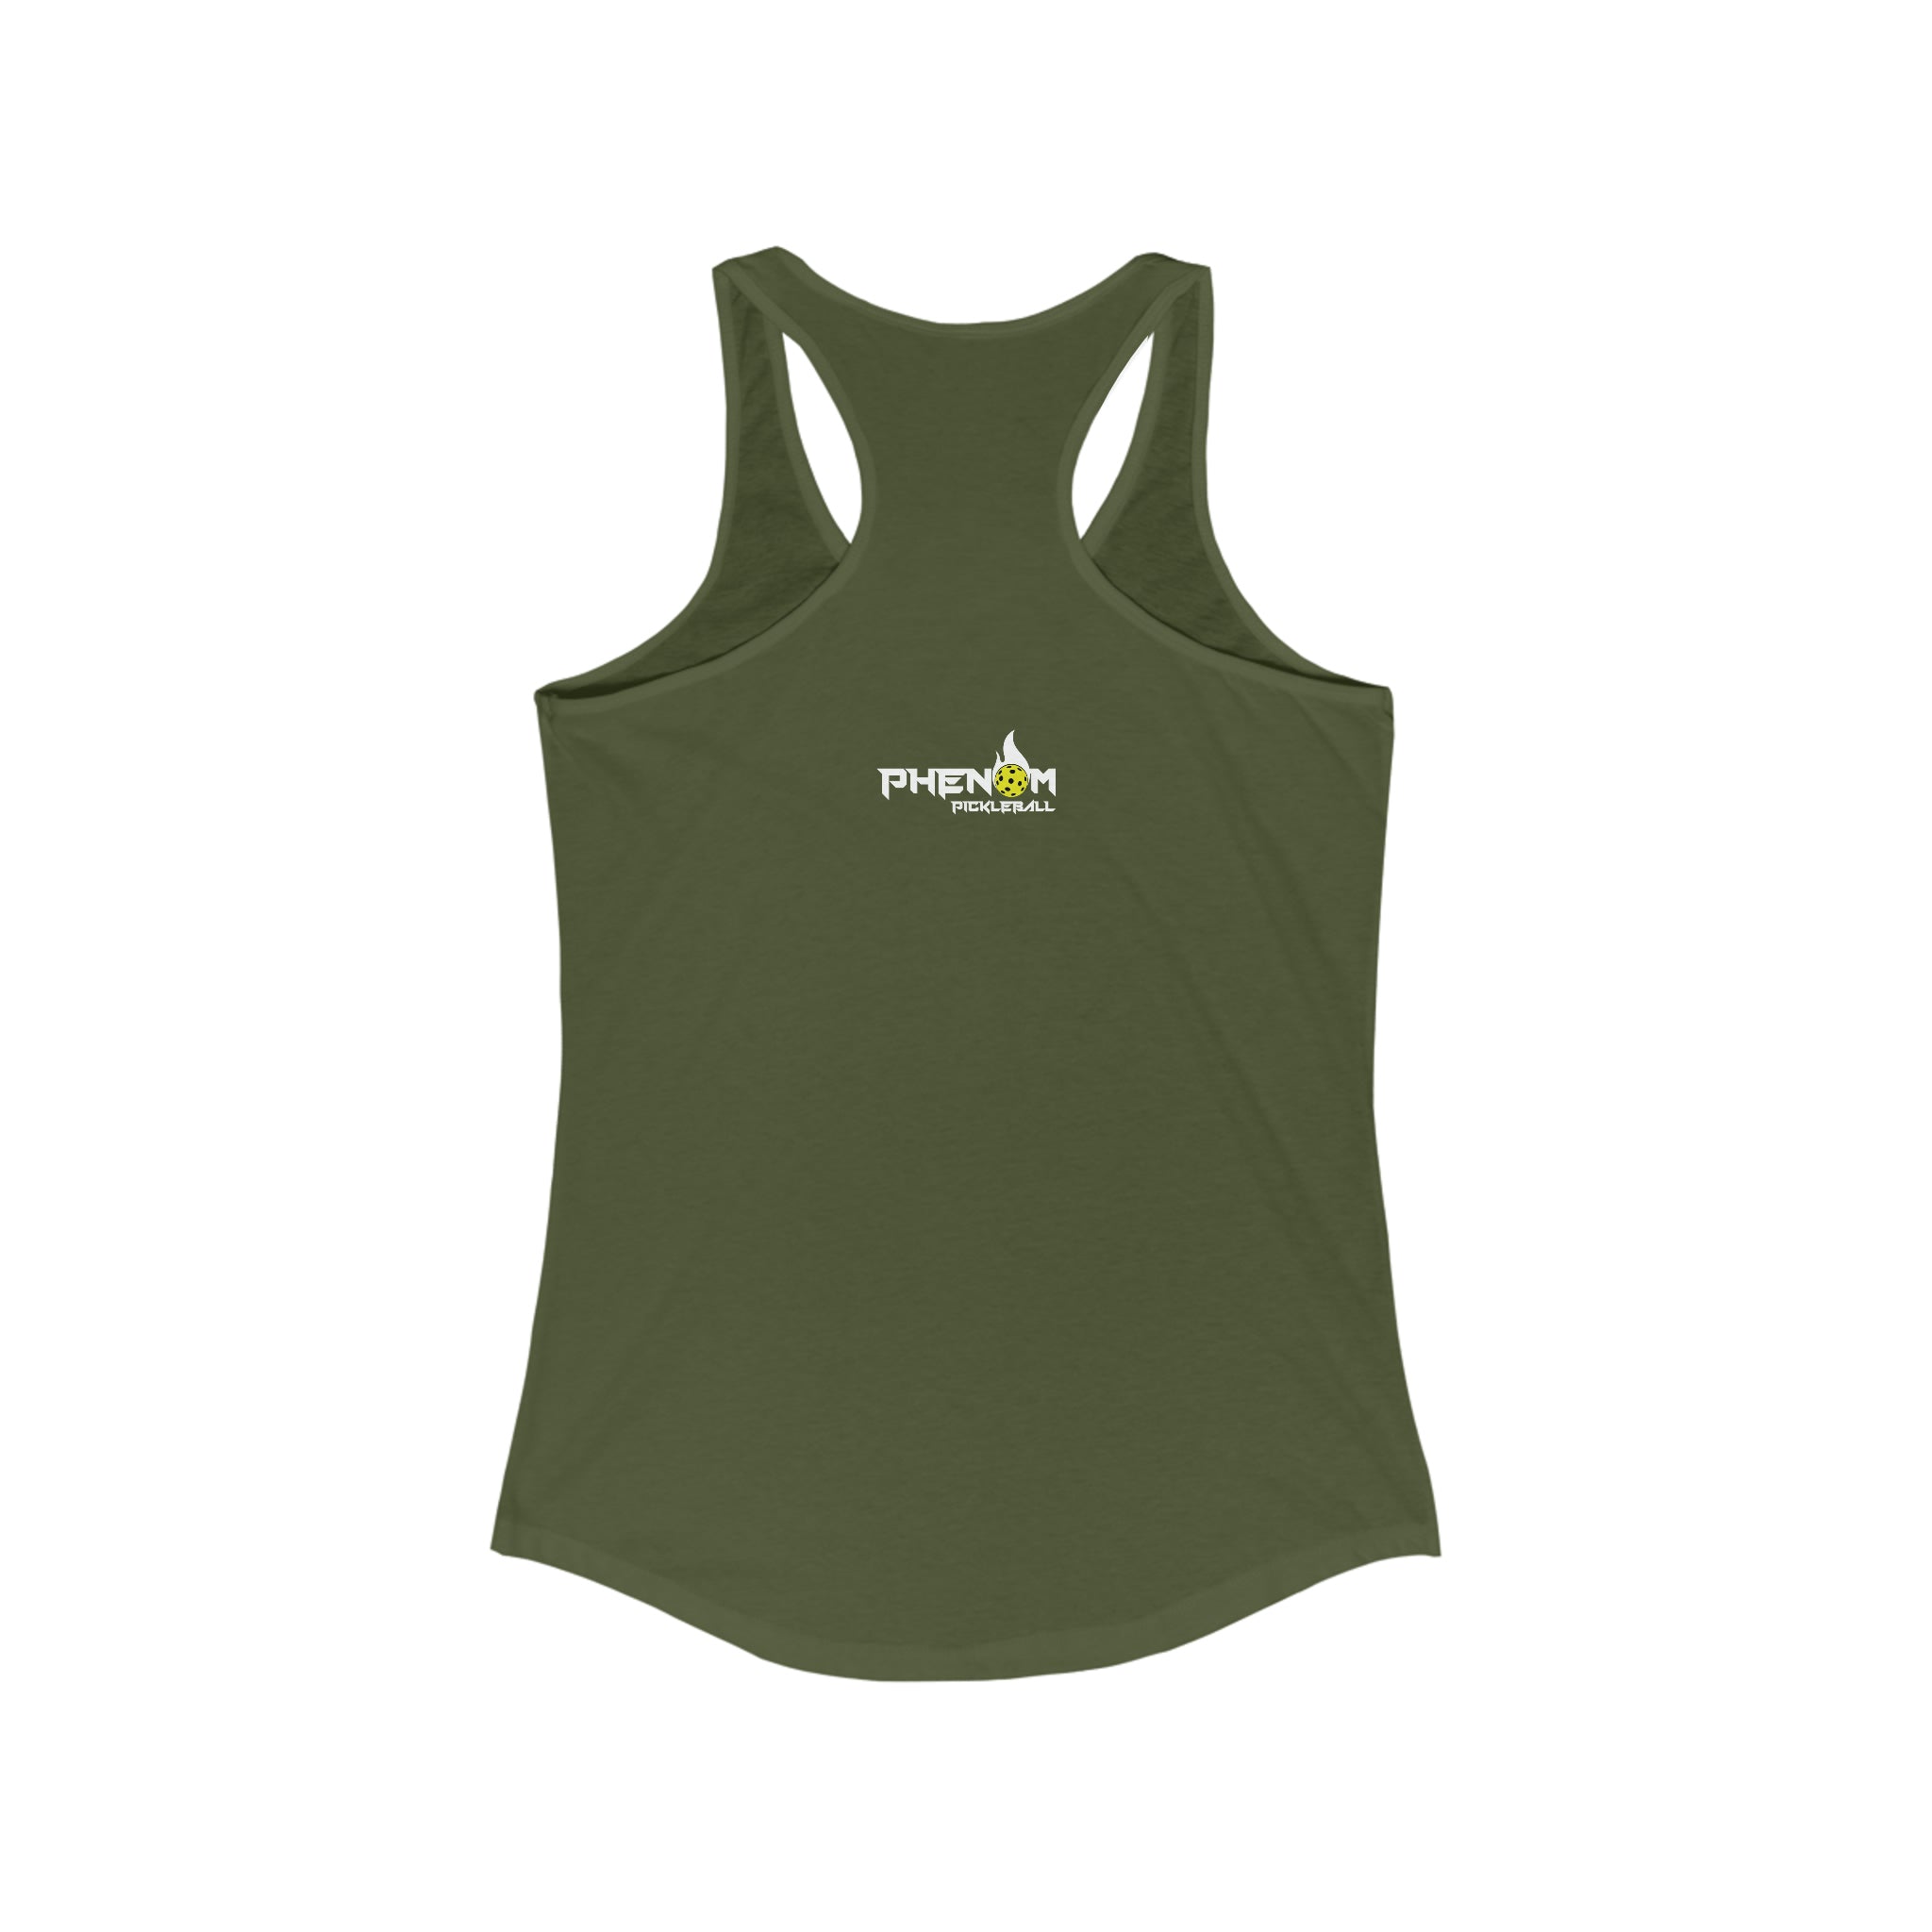 army green just here for the dinks and giggles women's racerback tank top pickleball apparel phenom logo back view